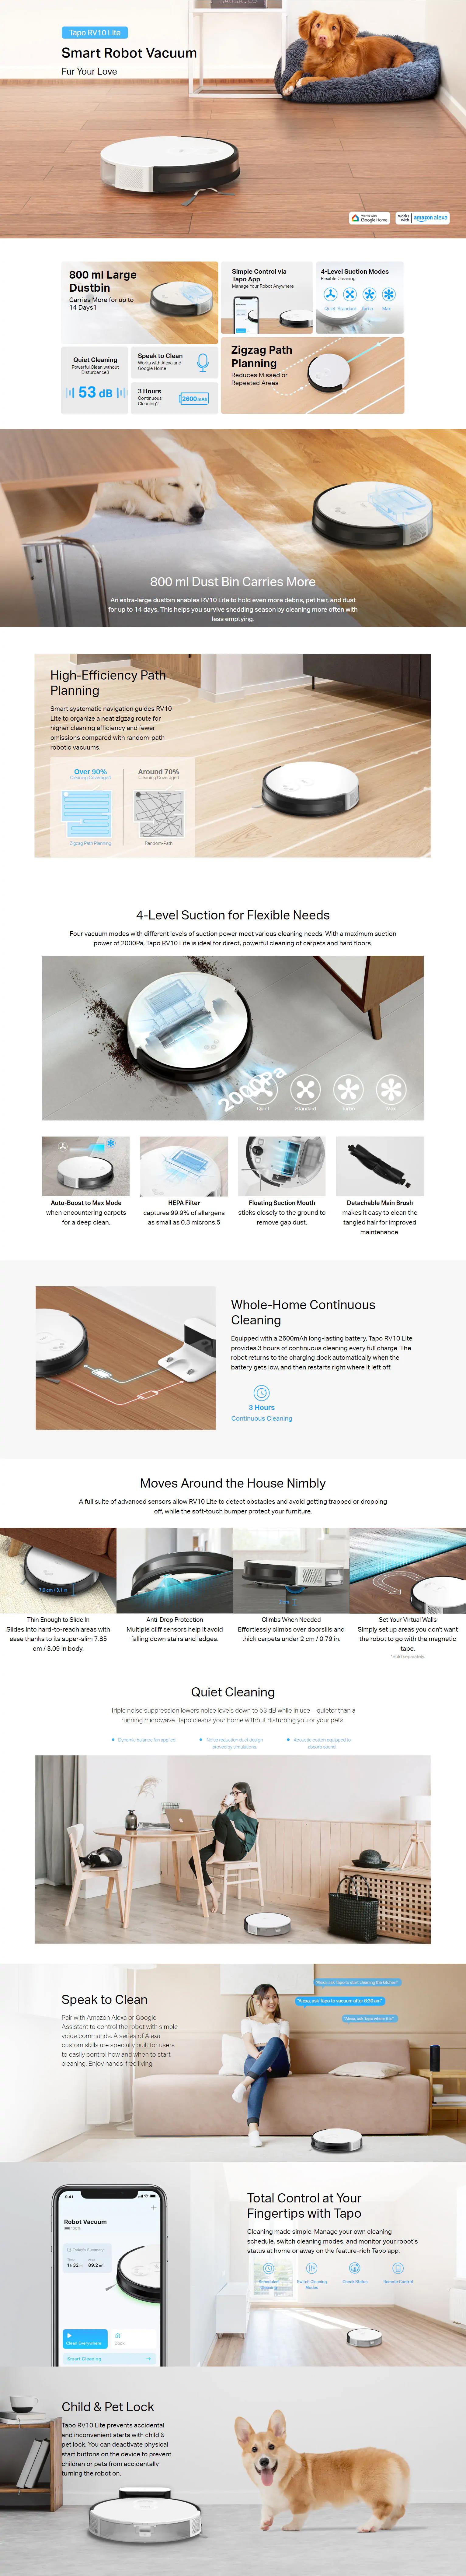 A large marketing image providing additional information about the product TP-Link Tapo RV10 Lite Robot Vacuum - Additional alt info not provided